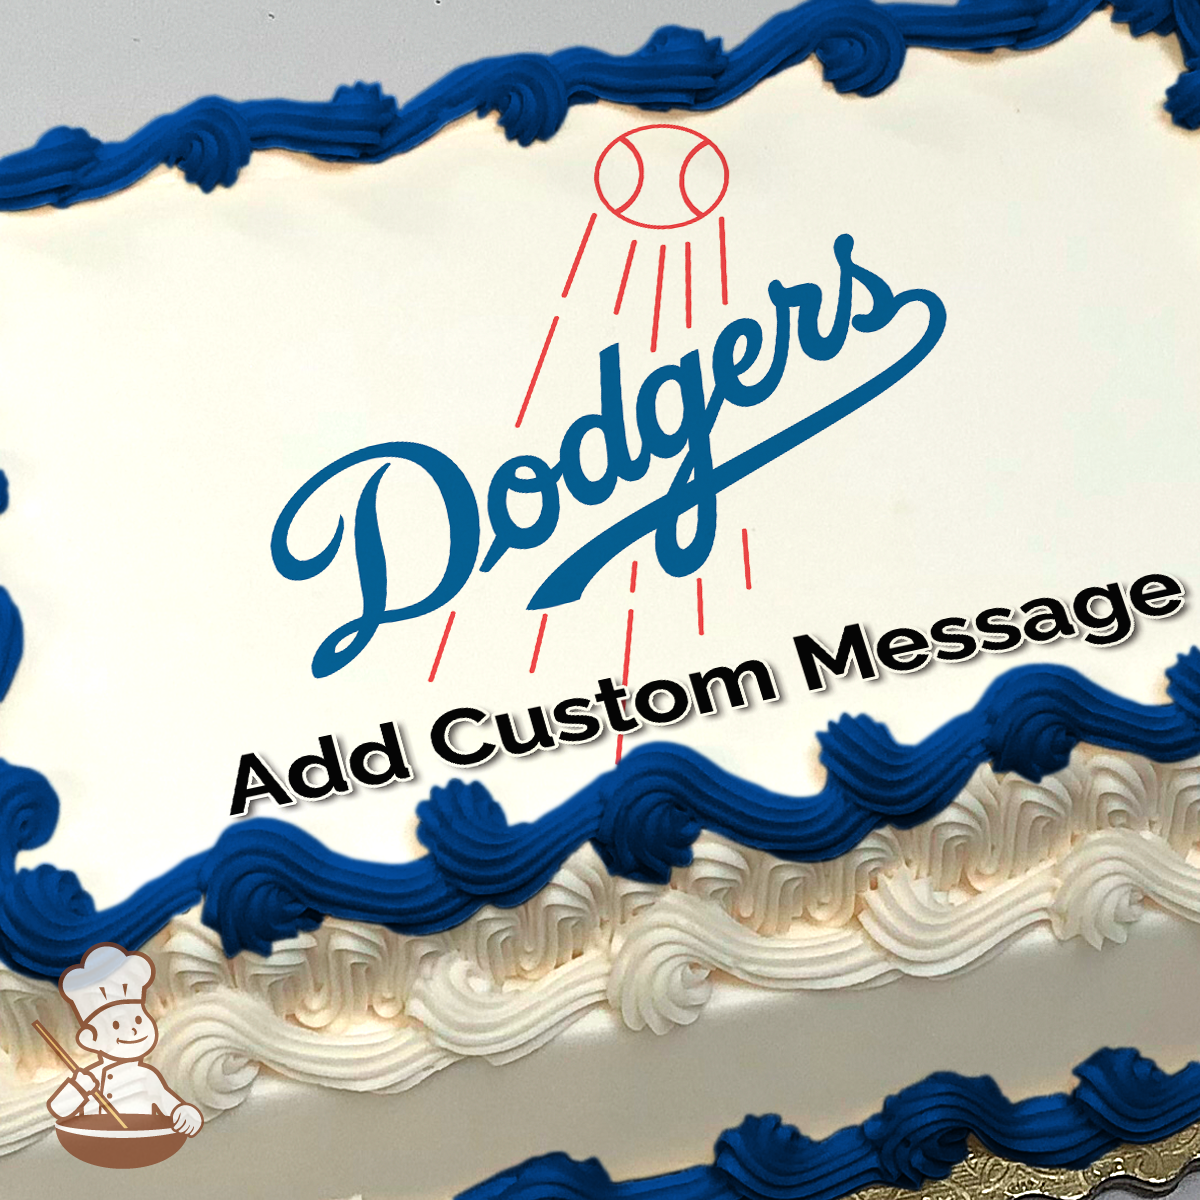 Dodgers designs, themes, templates and downloadable graphic